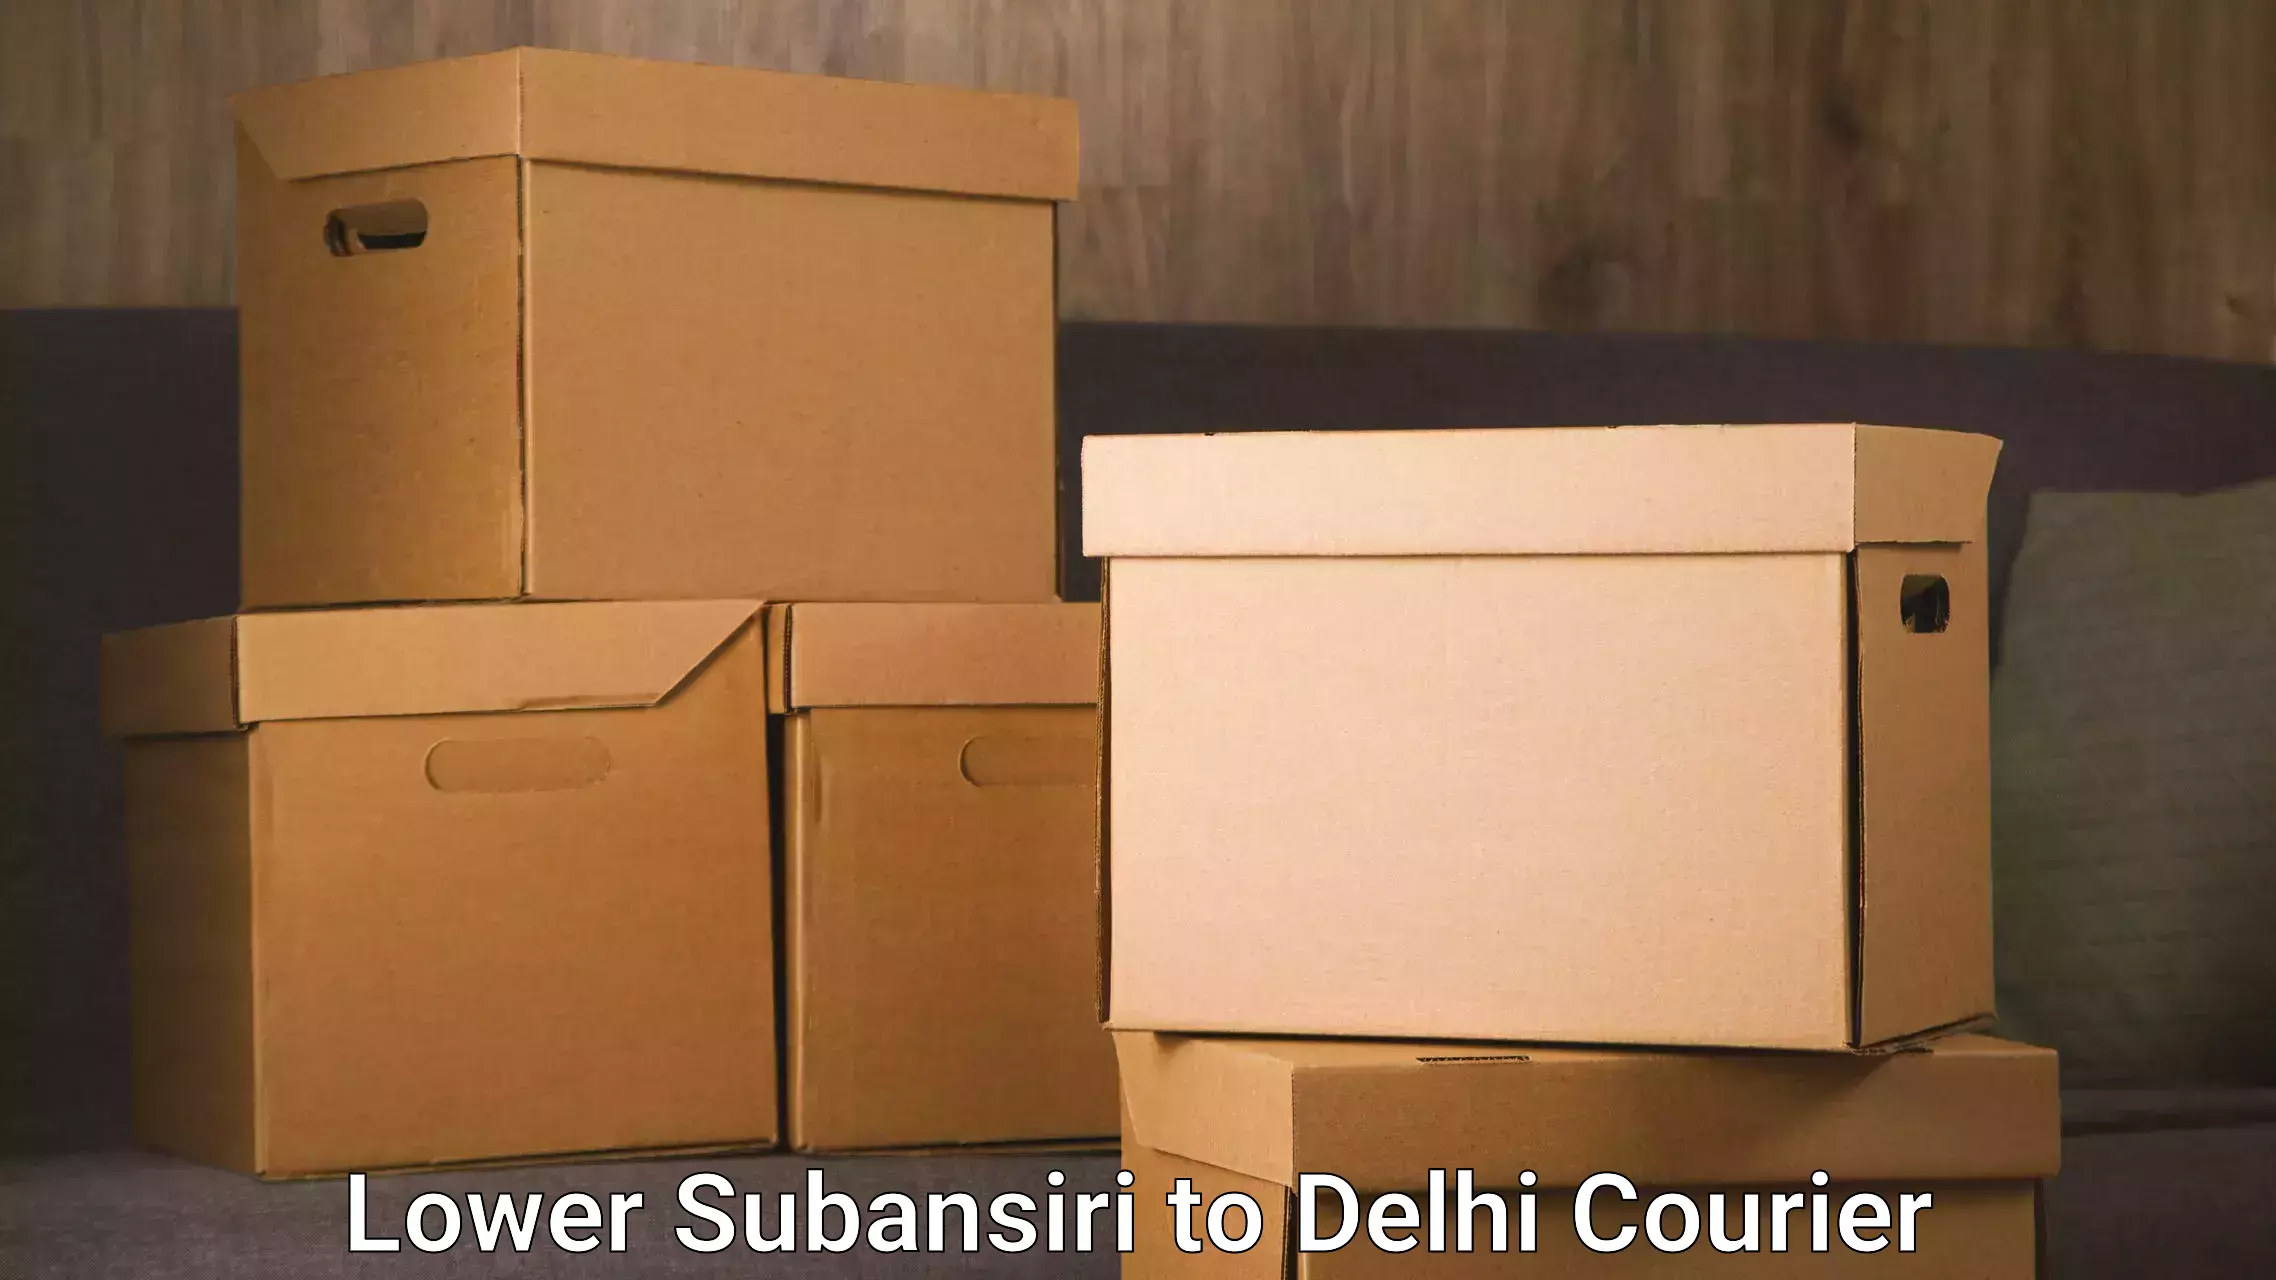 Courier service innovation in Lower Subansiri to Delhi